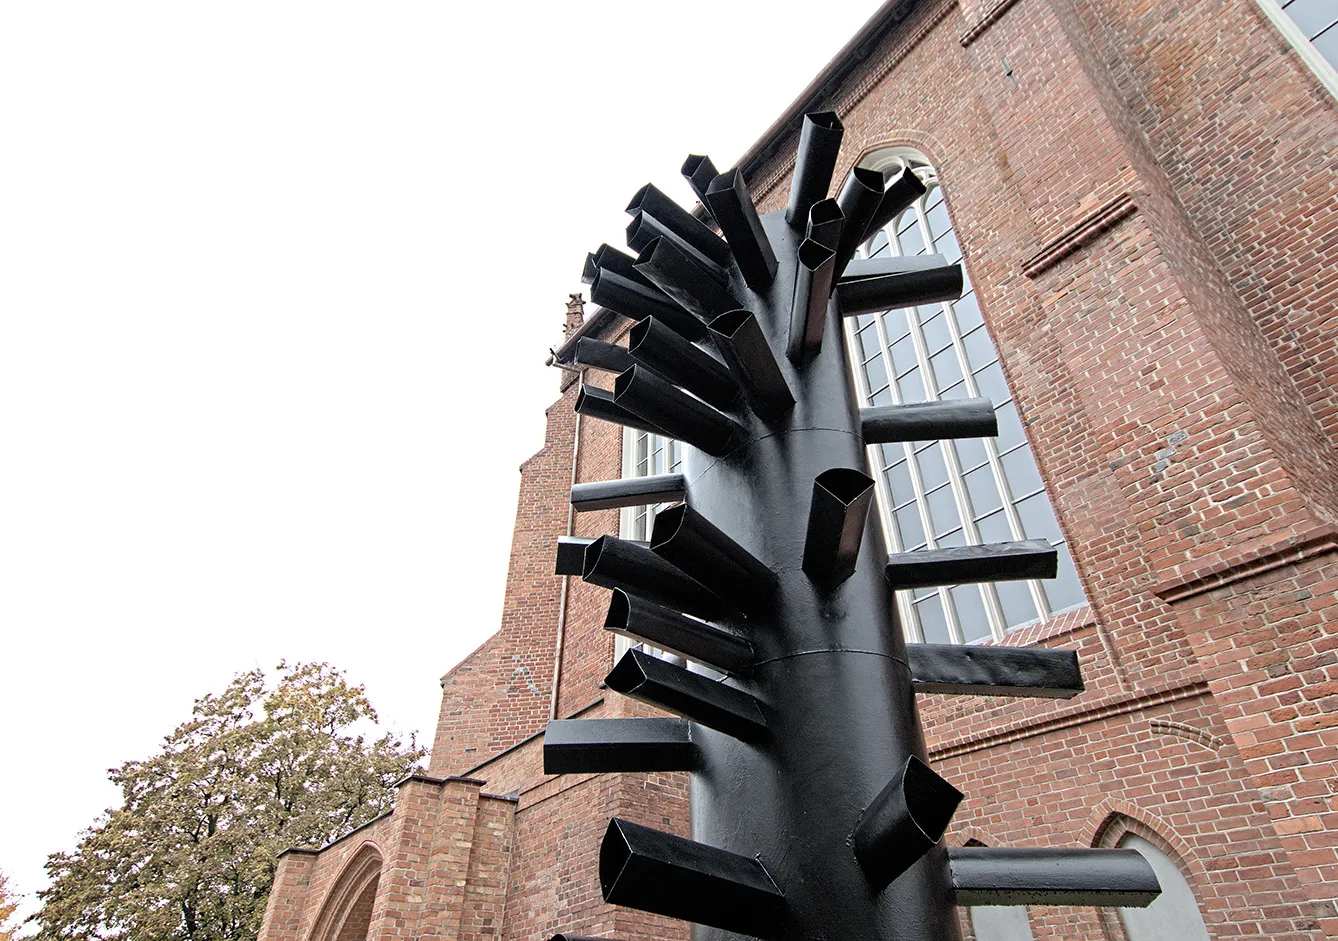 The sculpture by Magdalena Abakanowicz, is a tall, 7-meter composition, created from a rolled sheet of metal, on the outside of which the author placed short, polygonal in cross-section pipes. The whole suggests associations with a tree branch. Currently, Magdalena Abakanowicz's sculpture can be seen at the intersection of Przymurze and Przy Bramie Targowej streets, near the building of the High School.